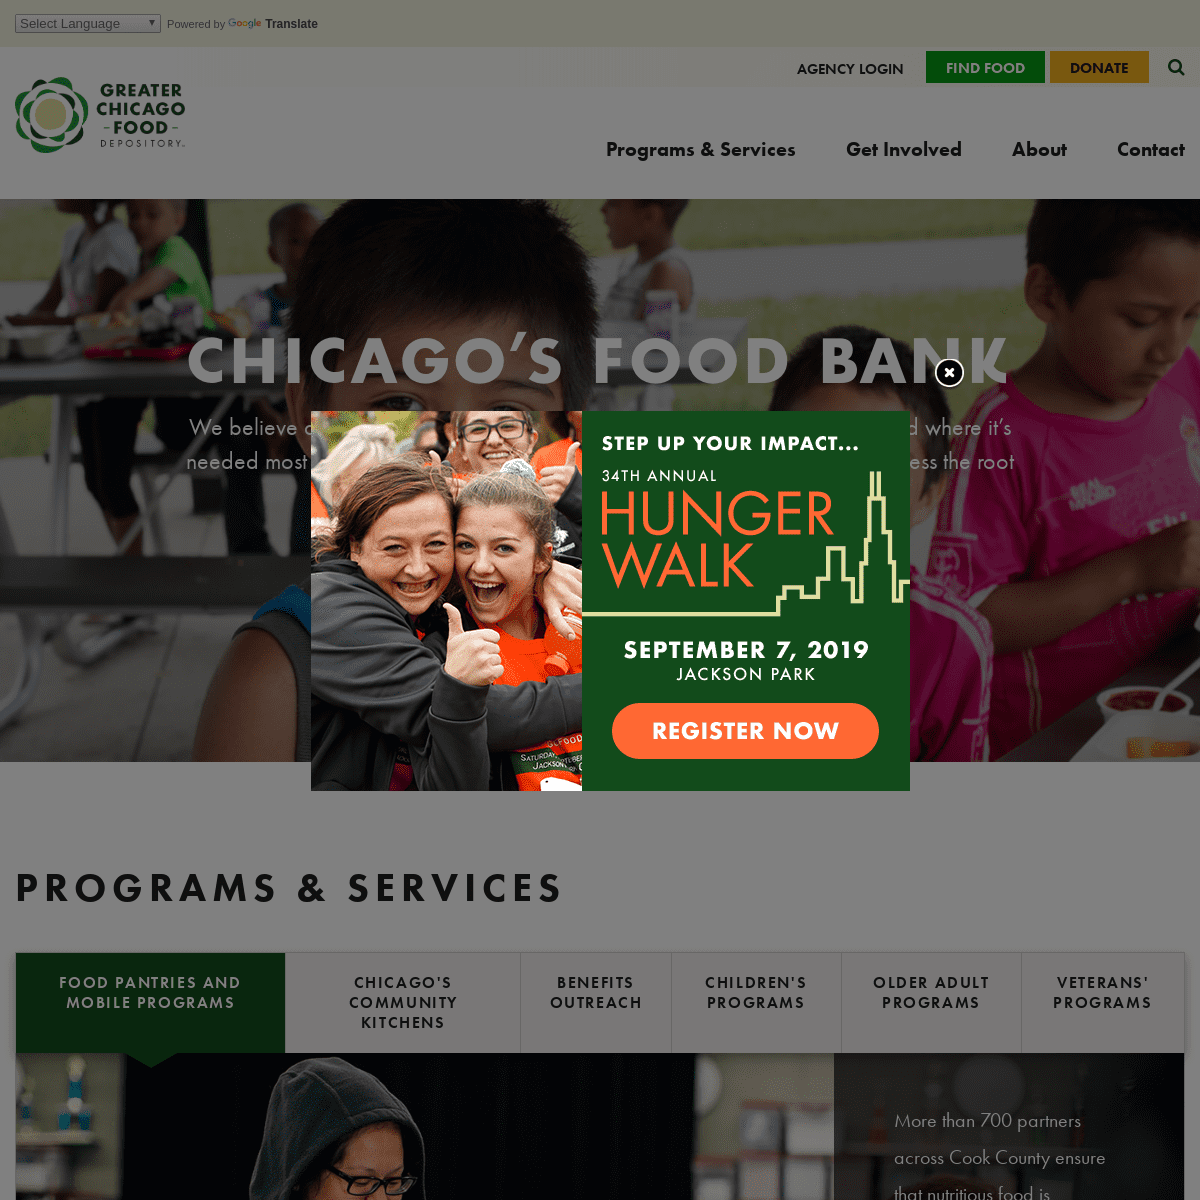 Greater Chicago Food Depository | Chicago's Food Bank